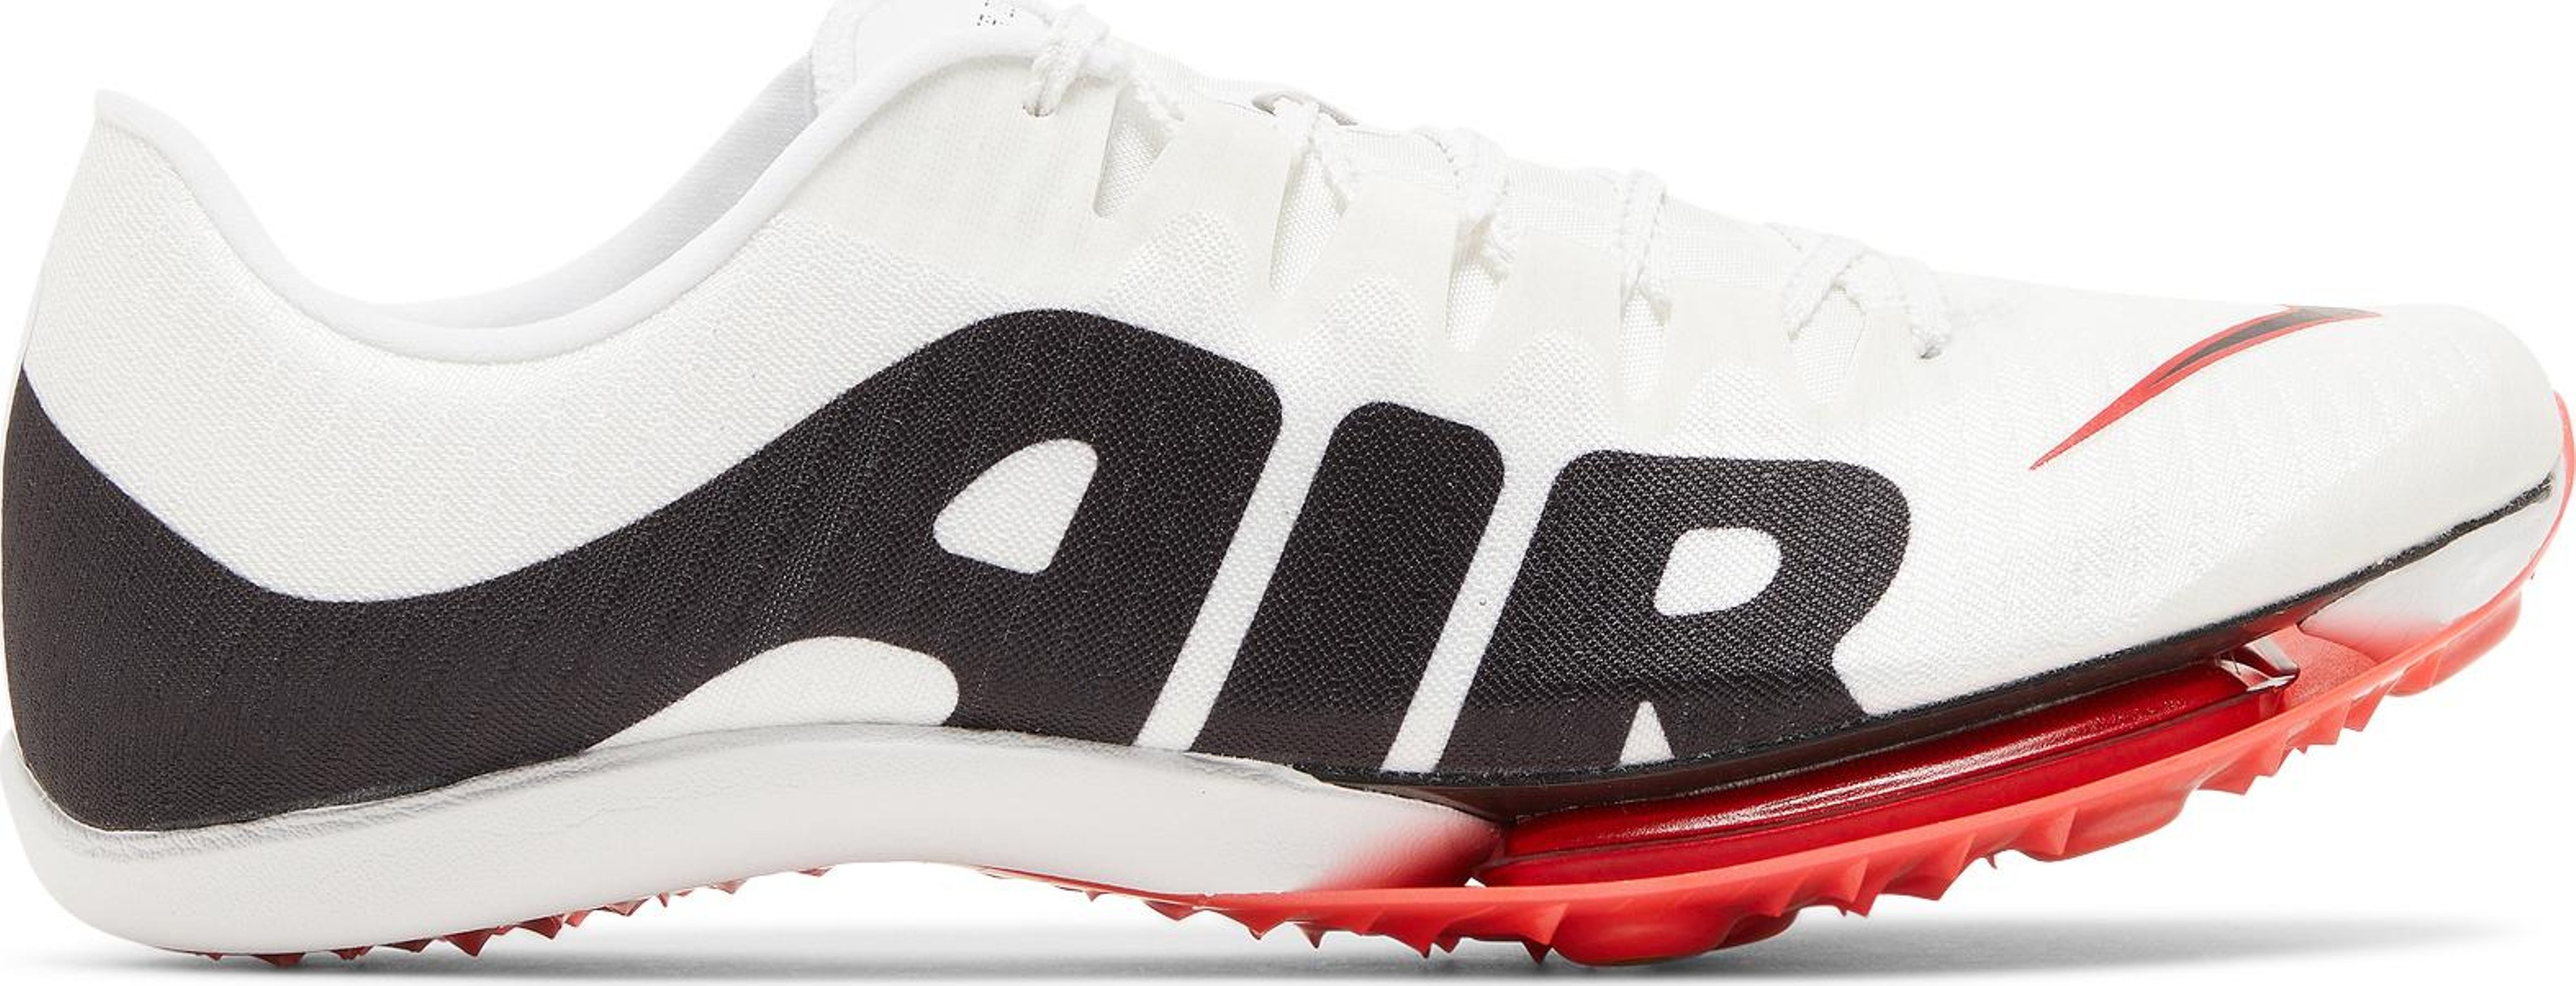 Buy Air Zoom Maxfly More Uptempo 'White University Red' - DN6948 111 | GOAT